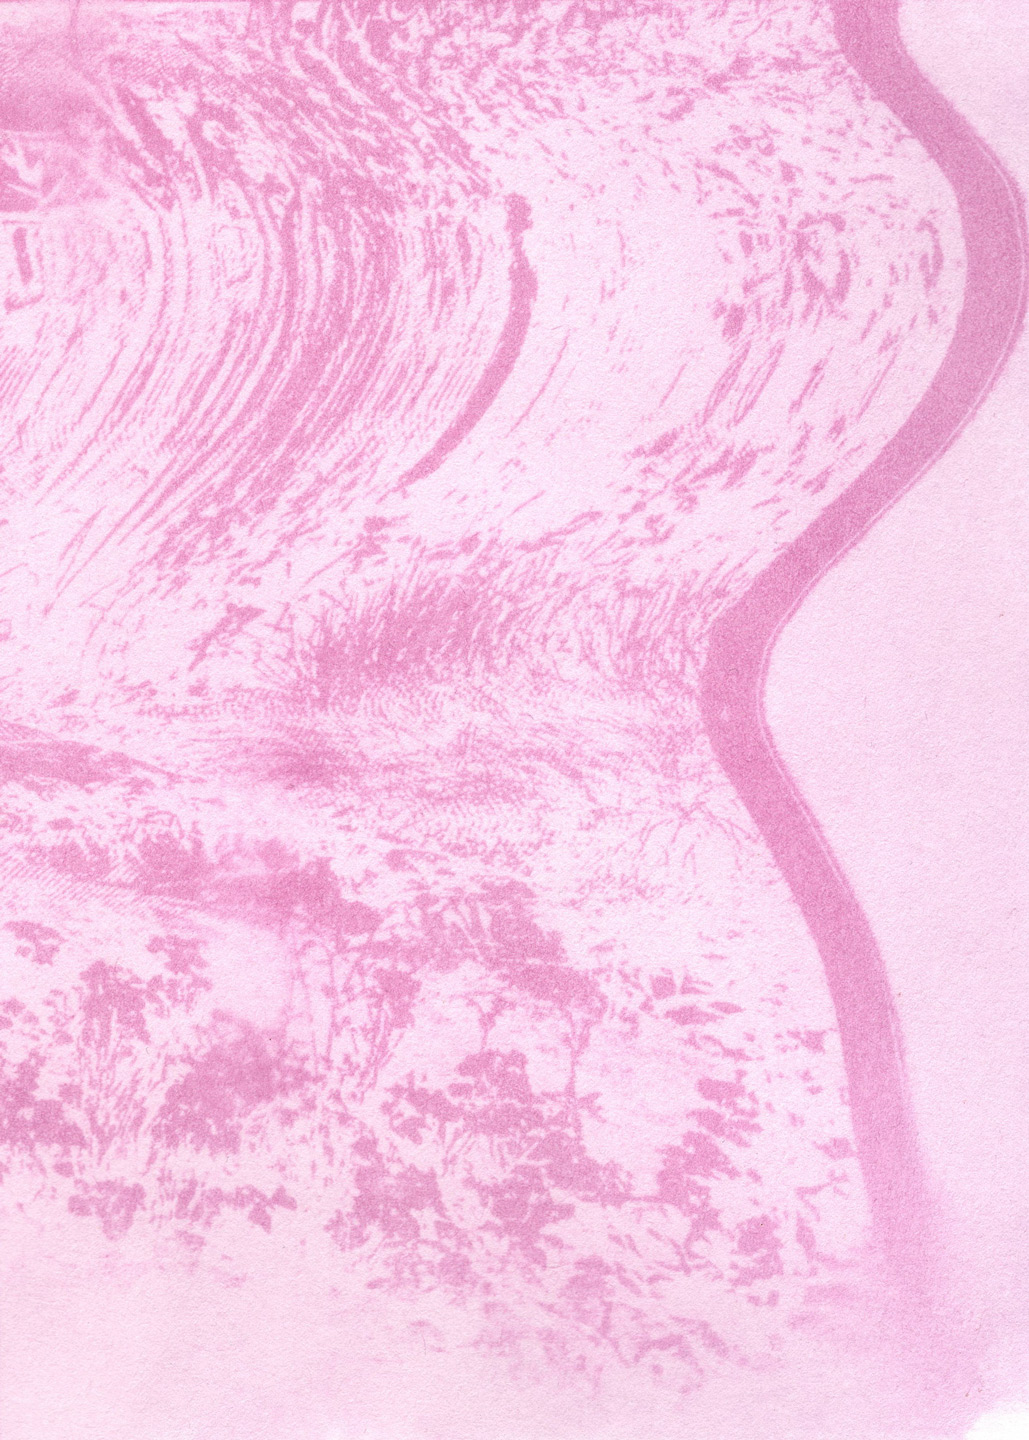 A SolarFast print created from the Nature/Wane scanograph piece. The pale pink background and darker pink abstract shapes add a softness, with no harsh contrasts. 